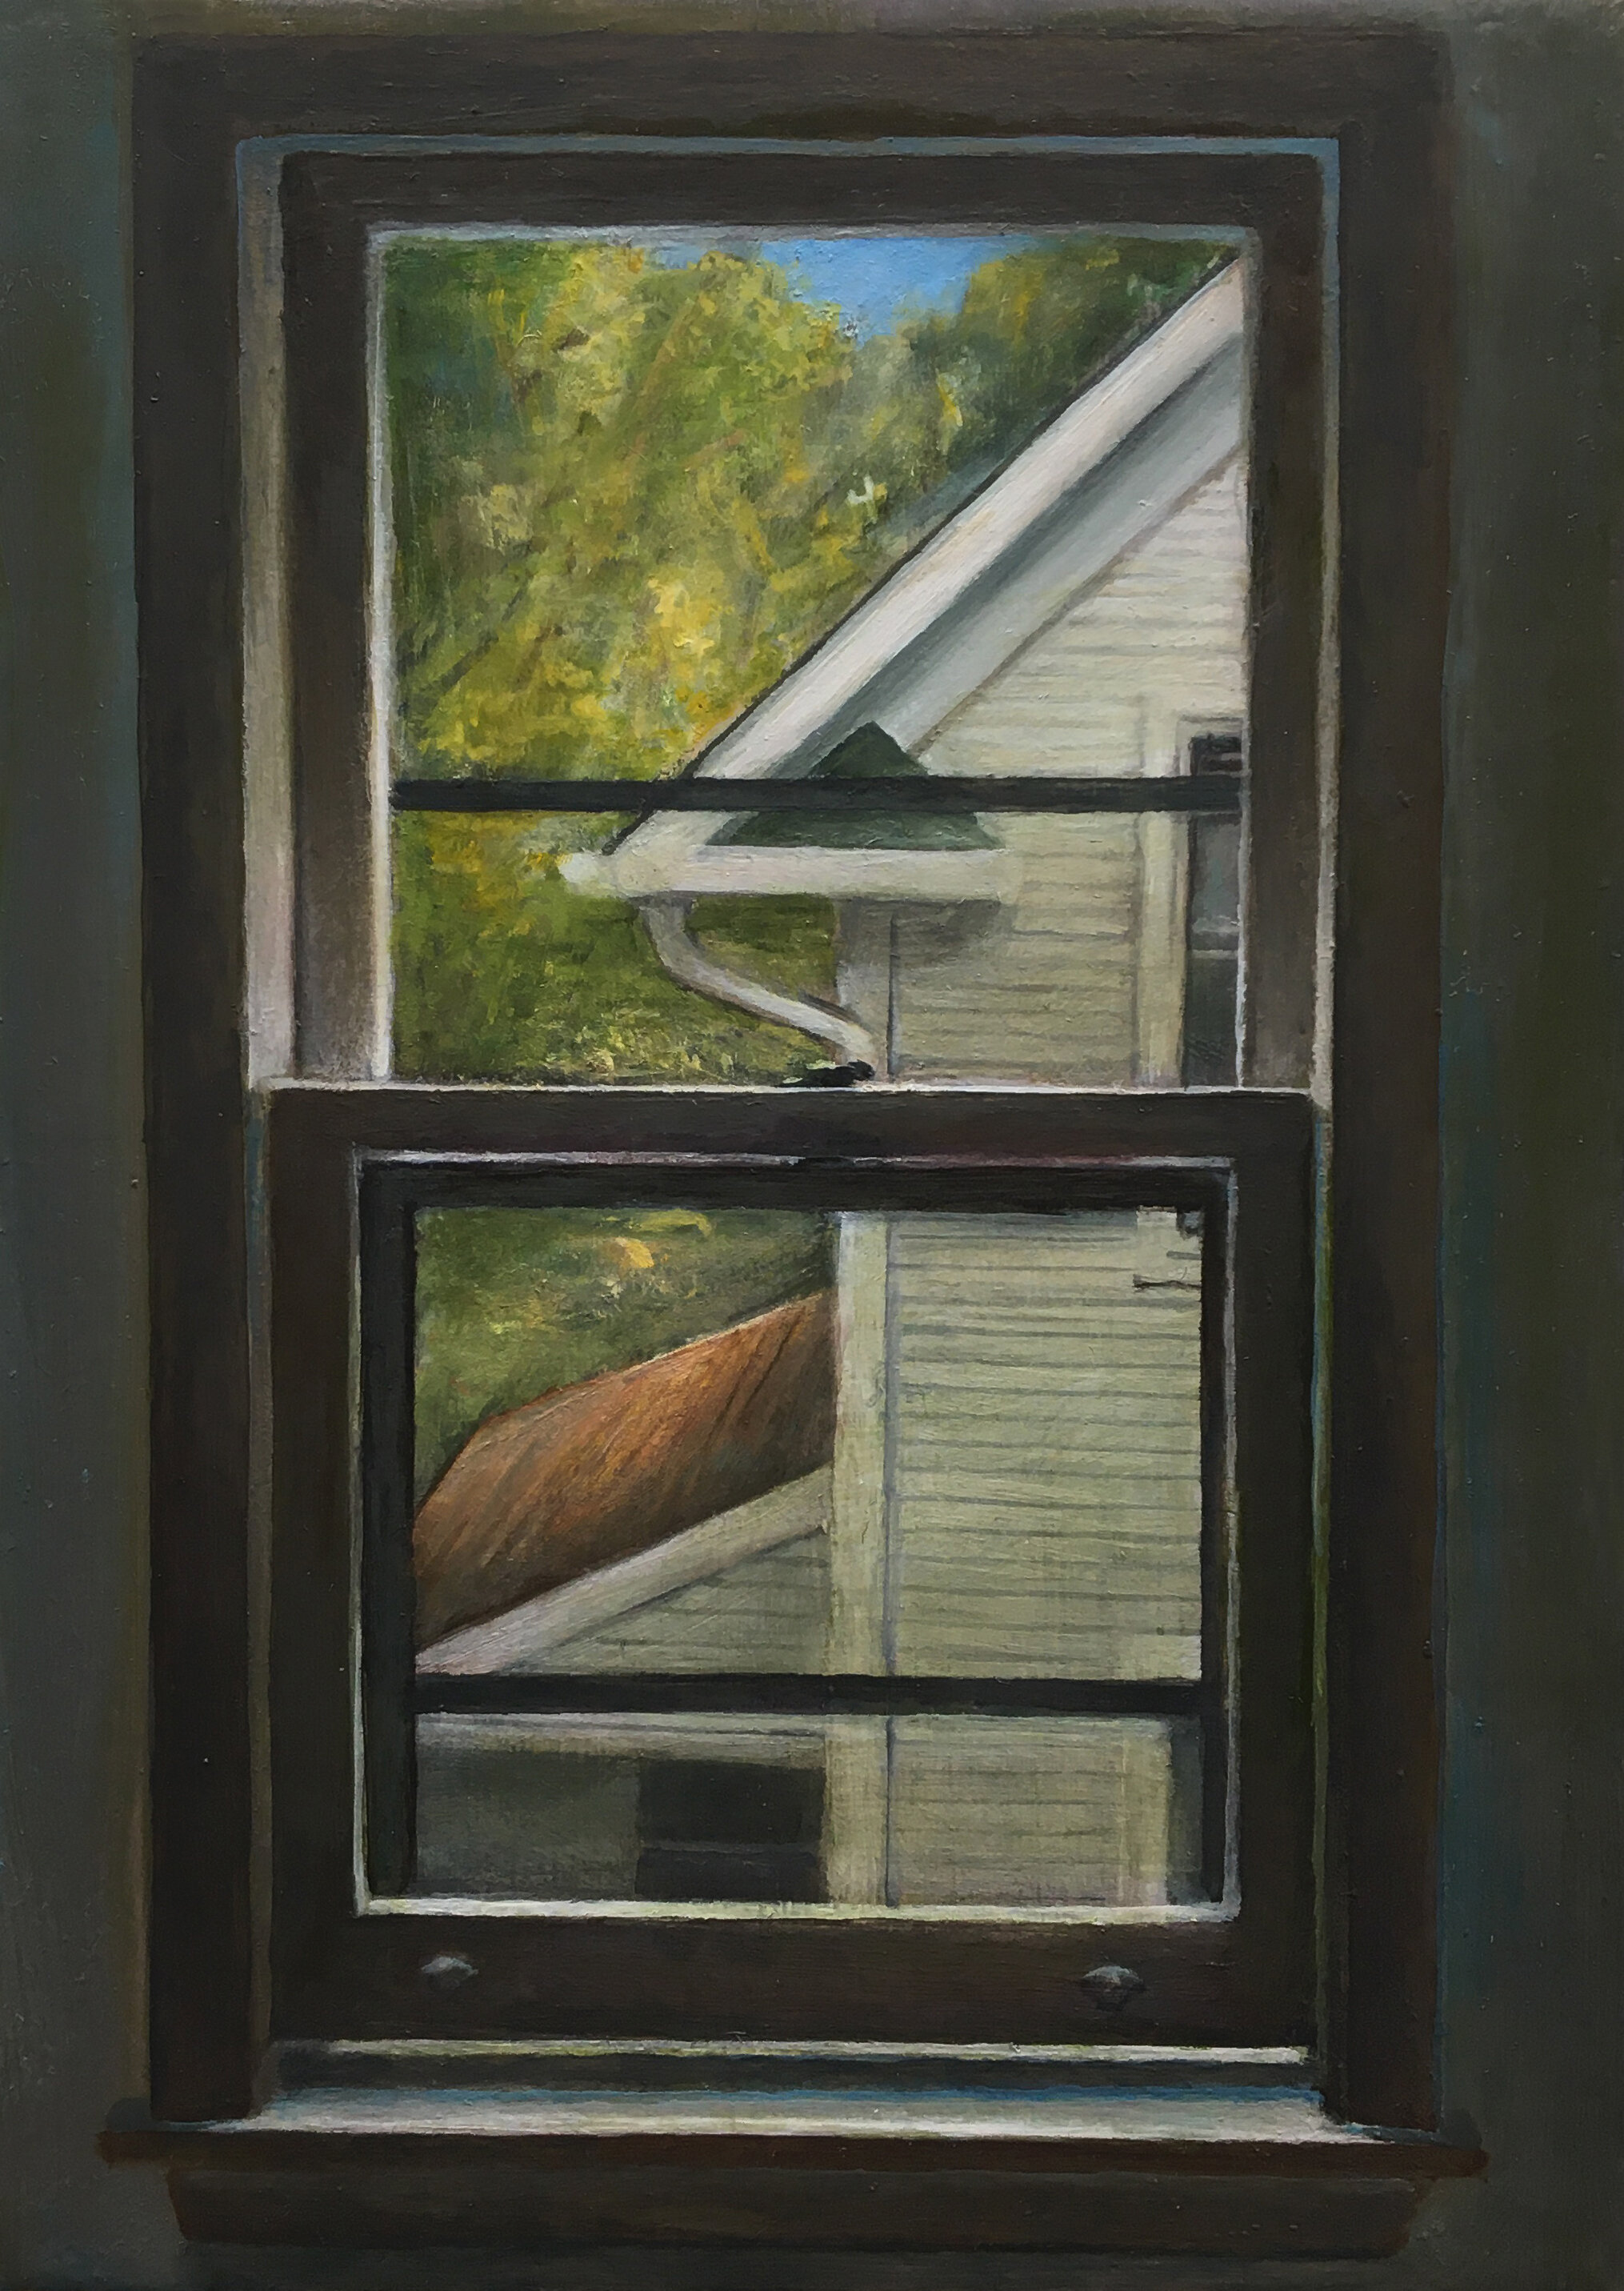   Summer Window   2020  Oil on linen over panel  7 x 5 inches       